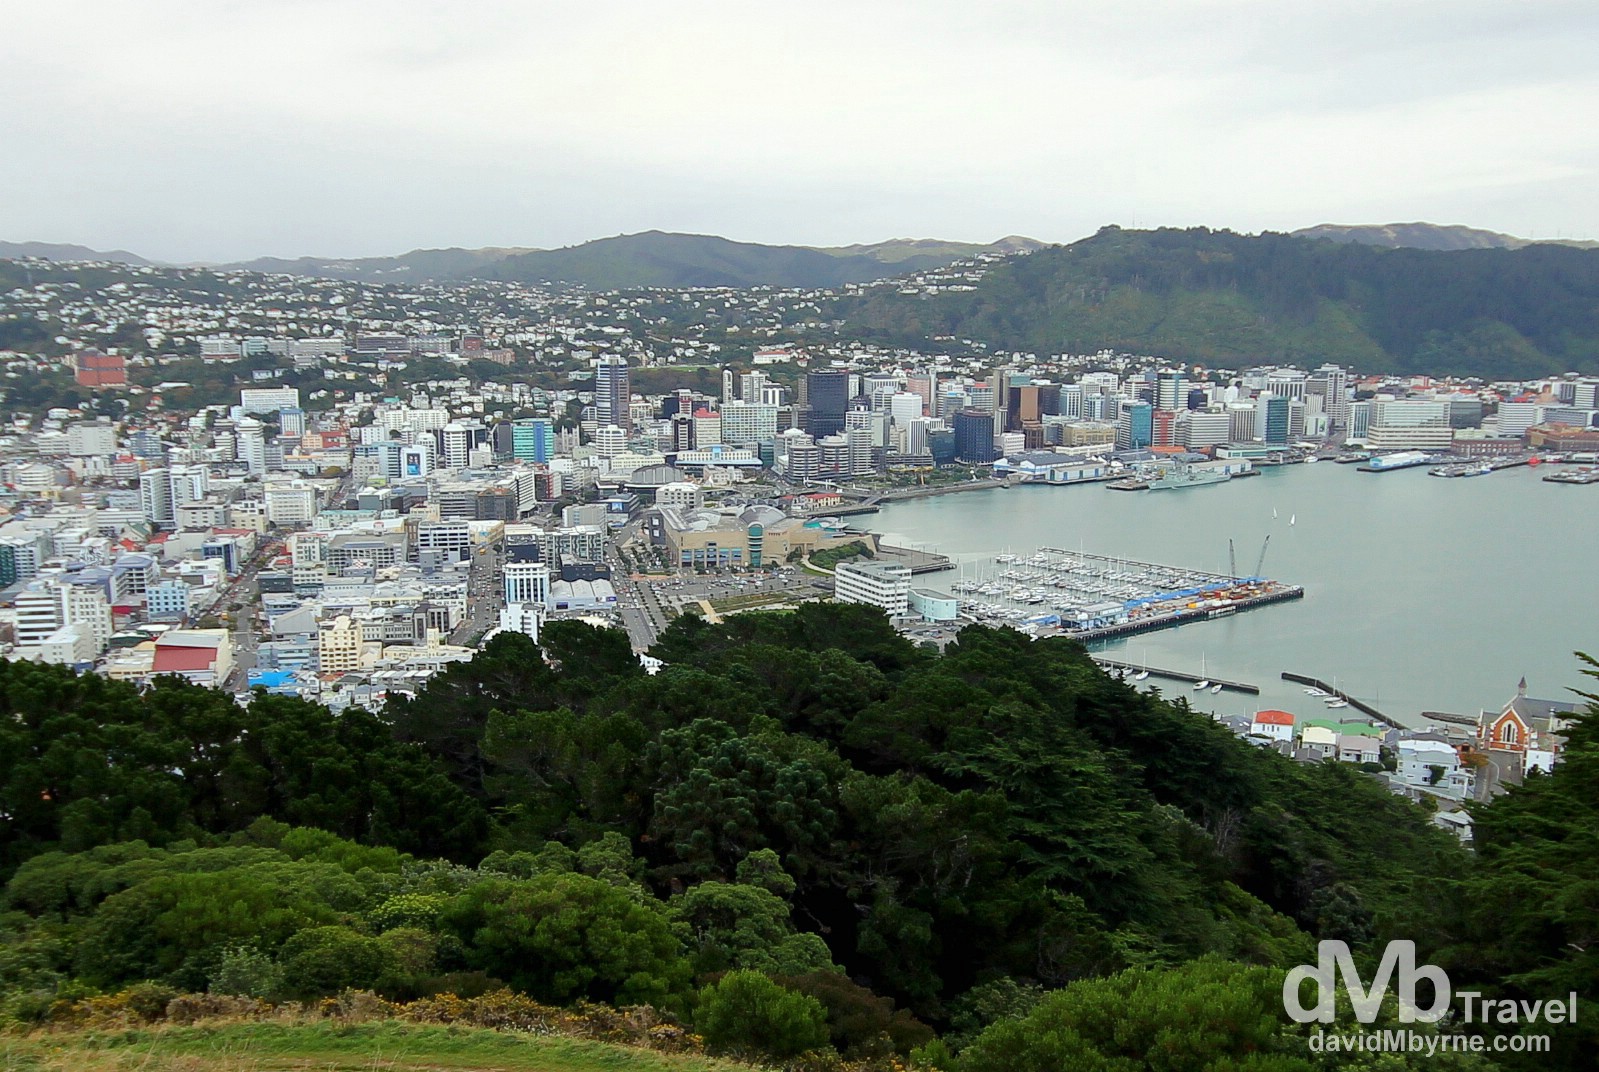 Wellington, North Island, New Zealand, as seen from the Mount Victoria lookout over the city. May 11th 2012.   